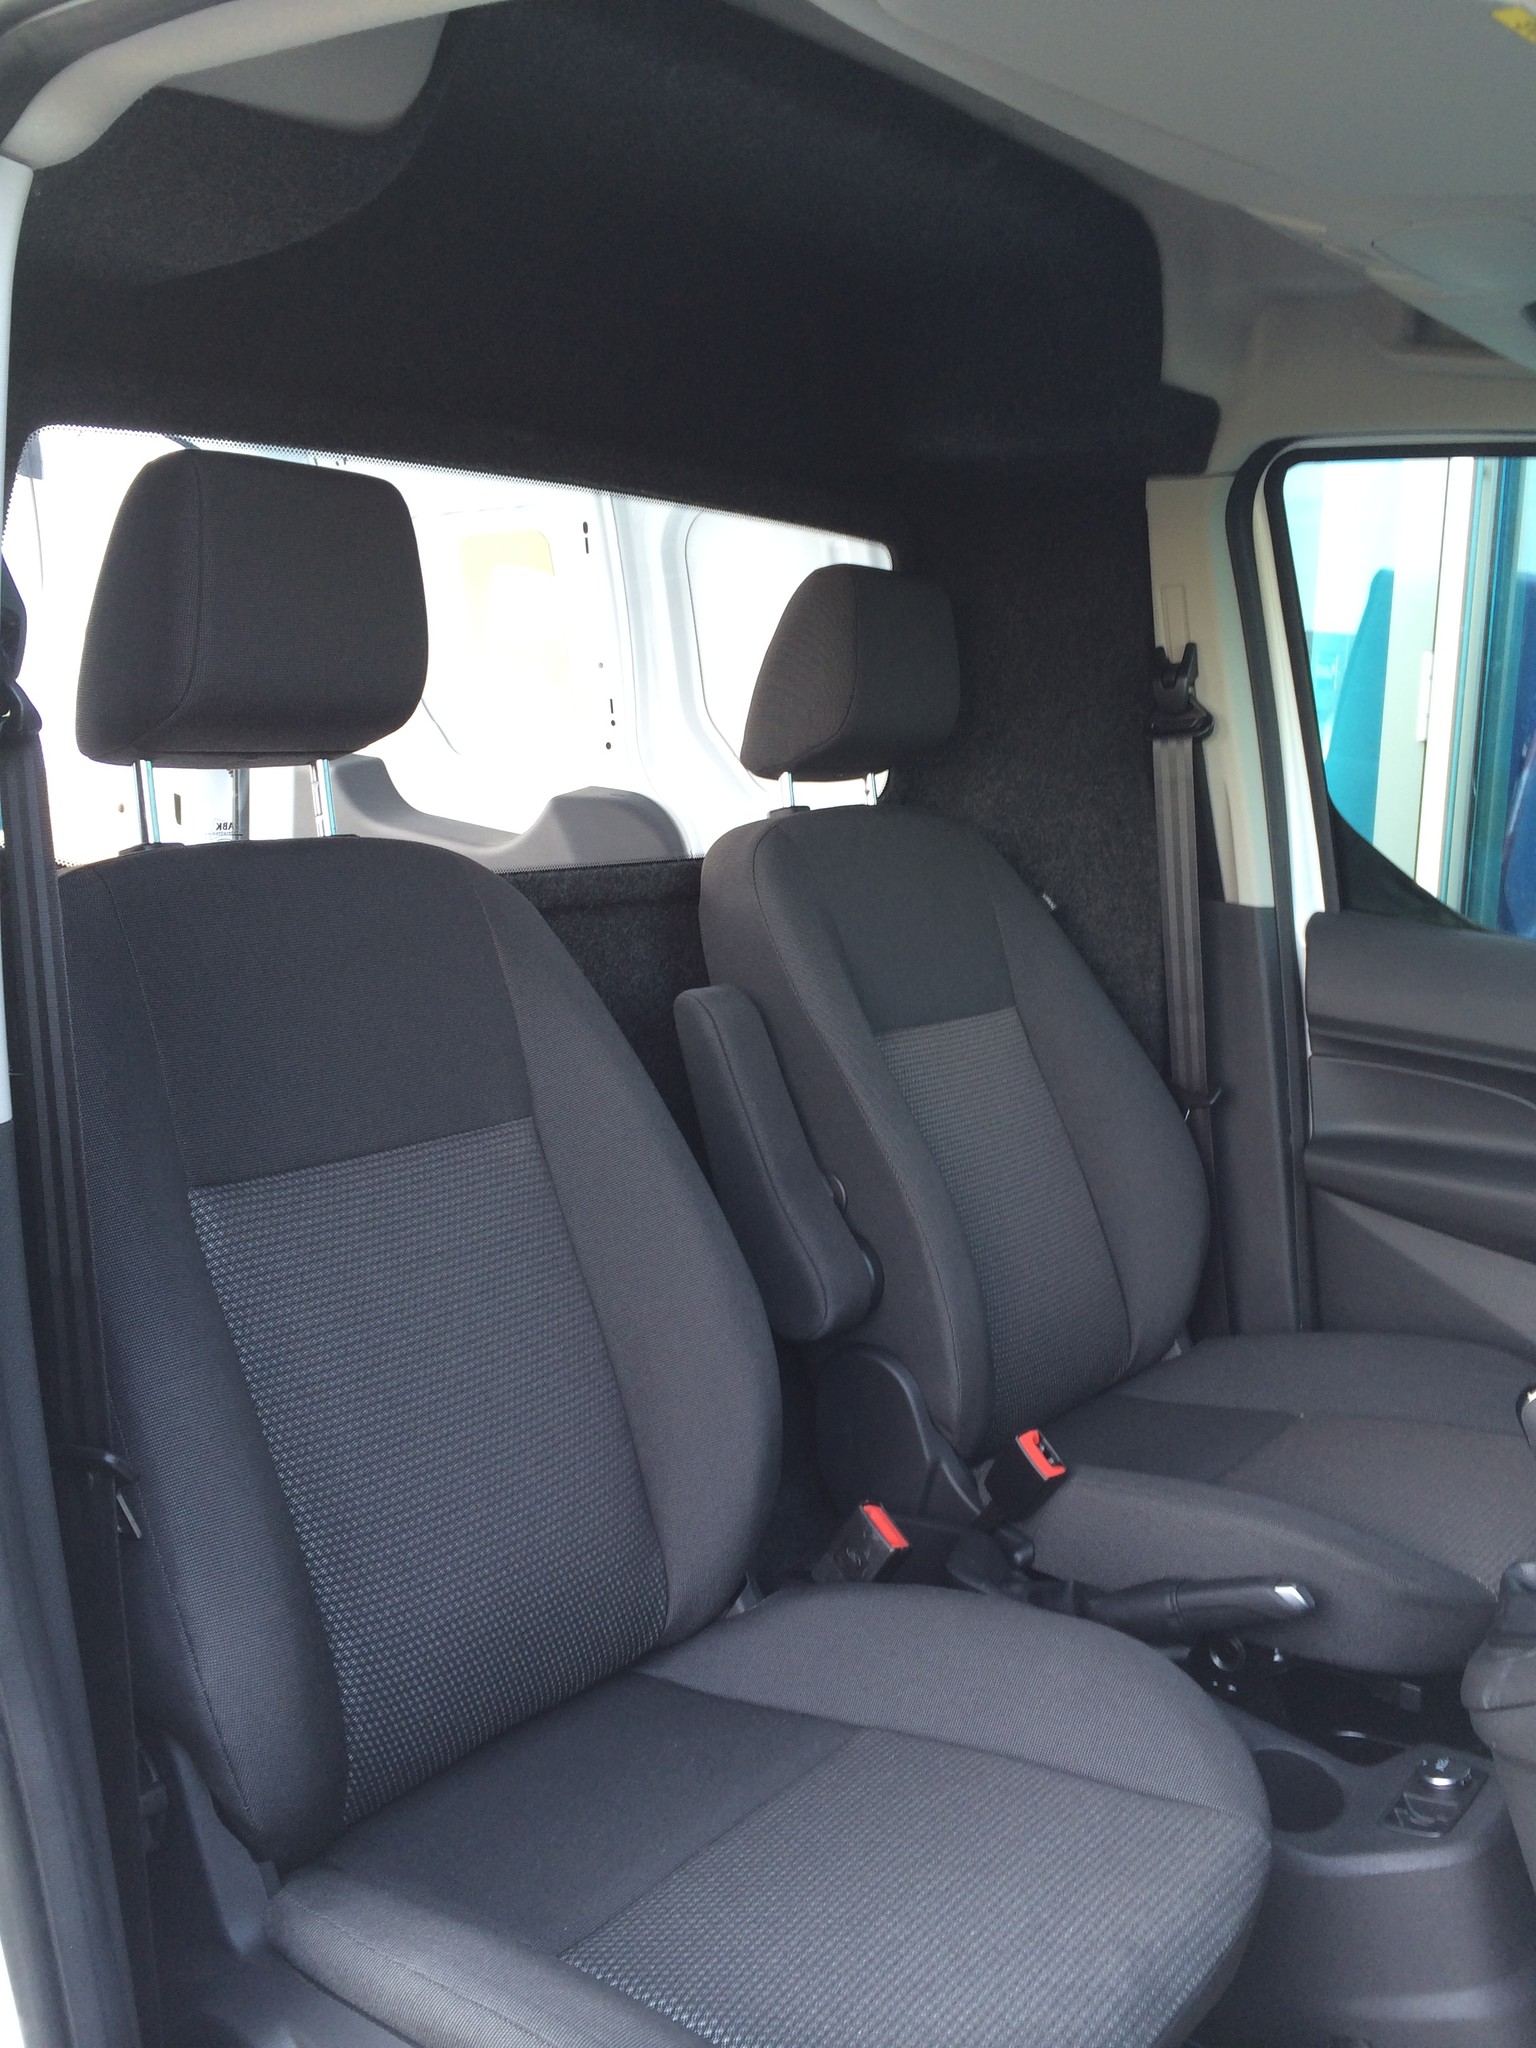 Tussenwand Ford Transit Connect vanaf 2014 met ruit